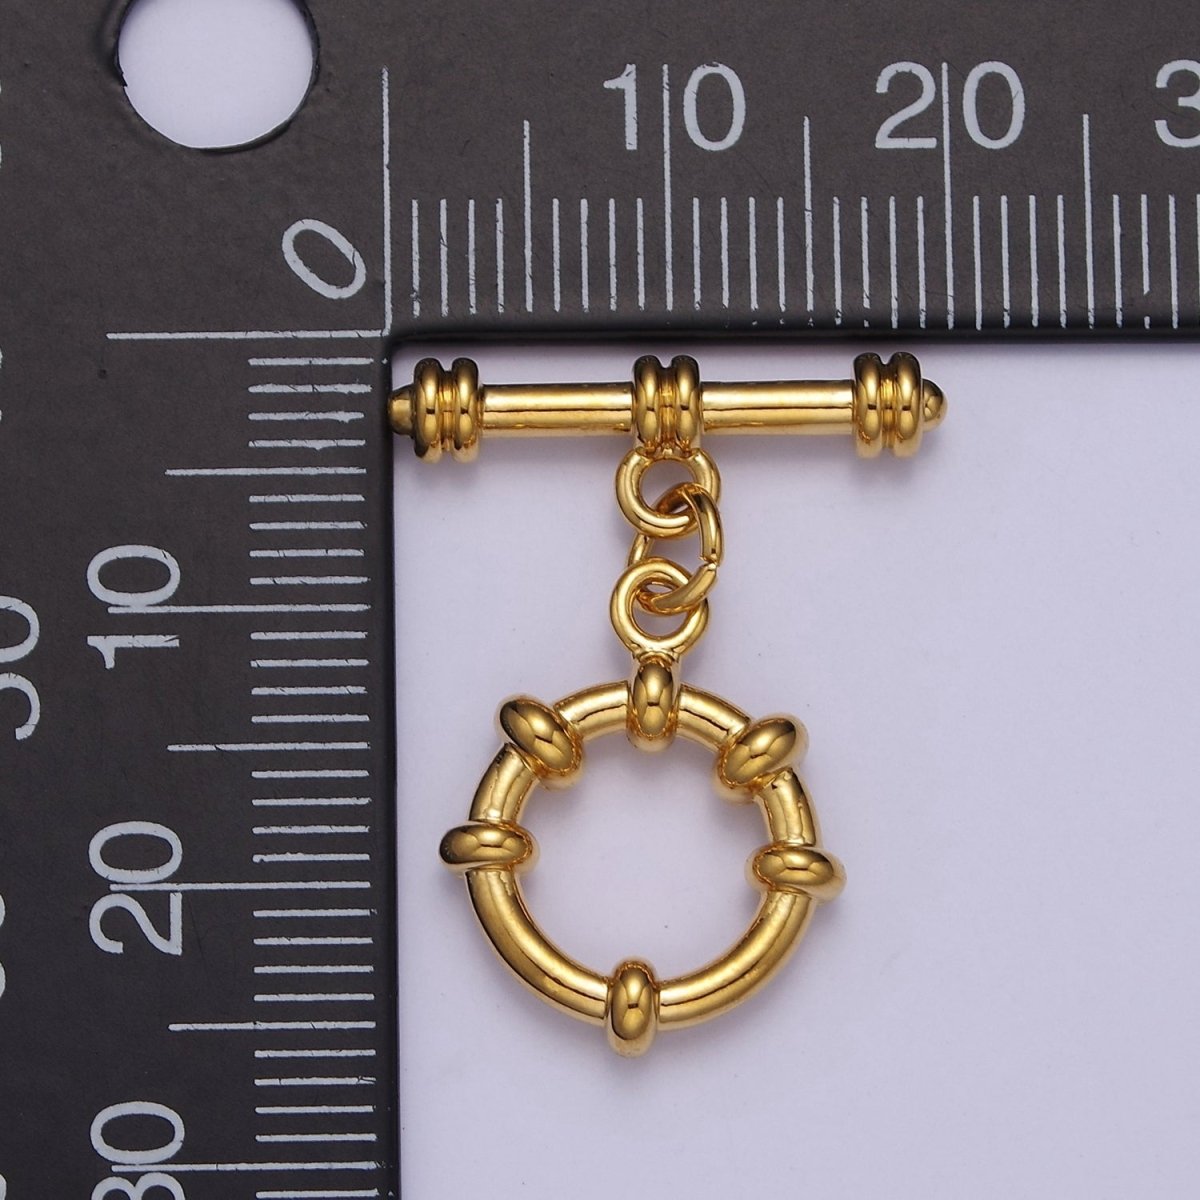 24k Gold Filled Round Toggle Clasp, Jewelry Clasp Sailor OT Clasp Findings L-690 L-691 L-692 - DLUXCA